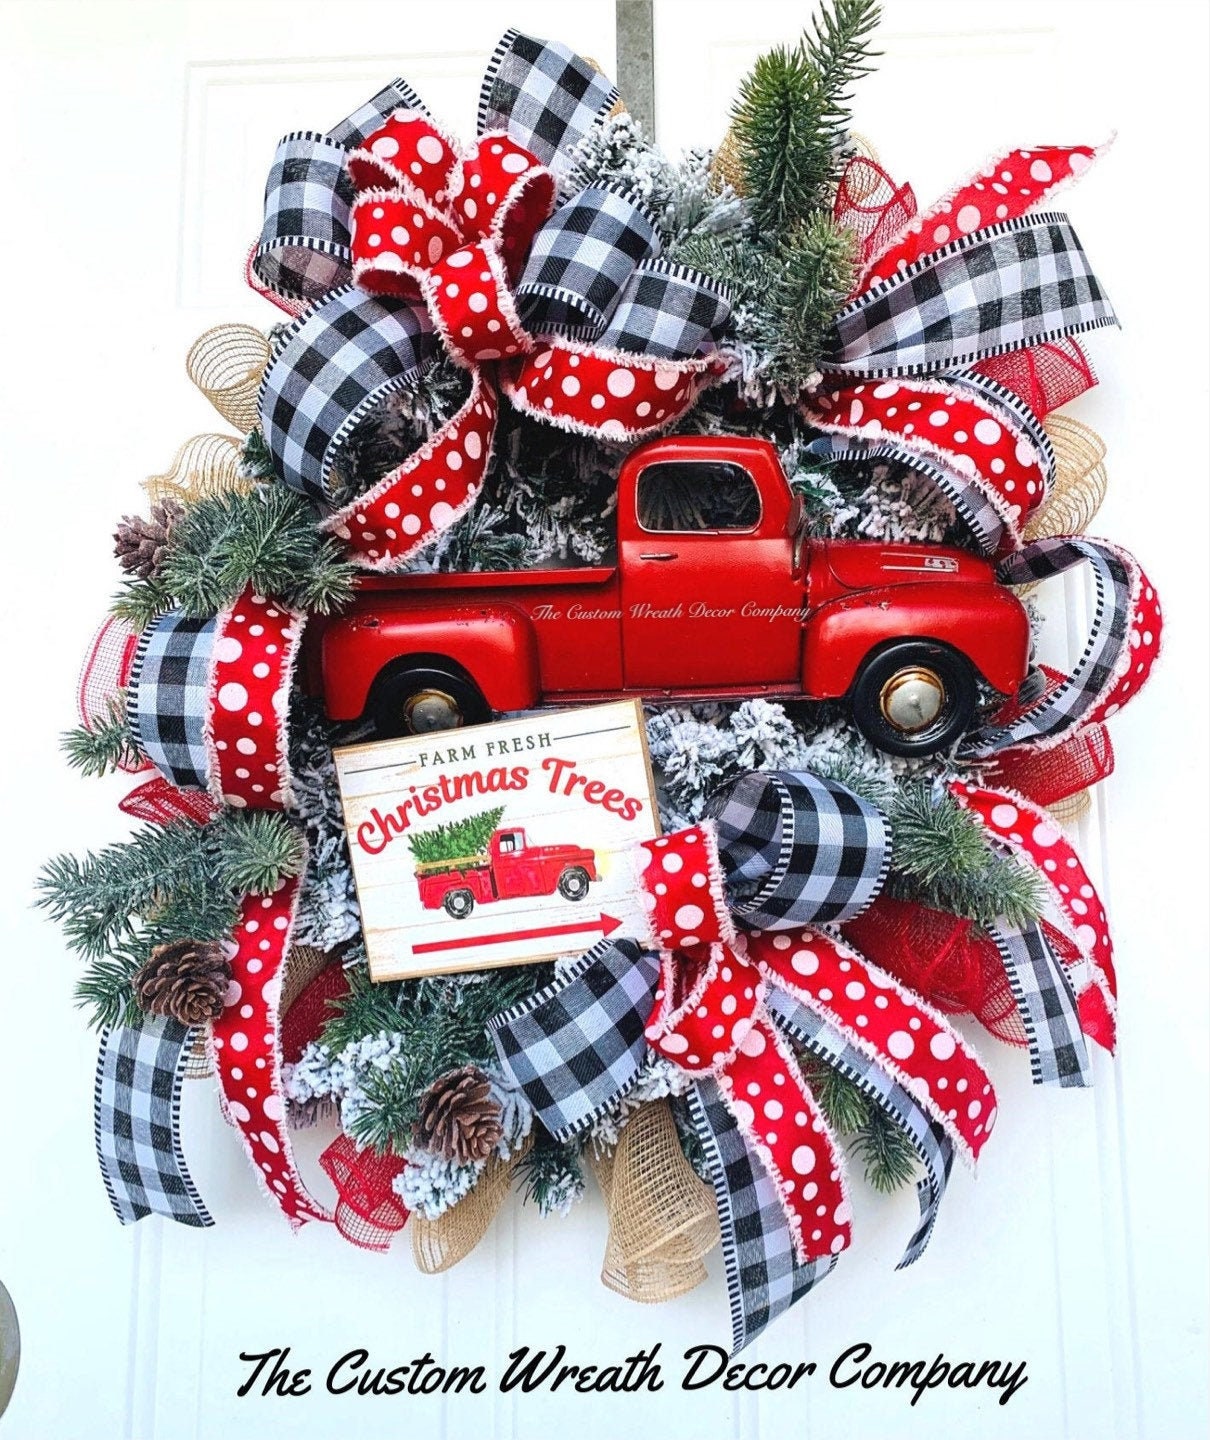 Red Truck Wreath, Vintage Truck Wreath, Red Truck Christmas Wreath, Christmas Tree Wreath, Buffalo Plaid Christmas Wreath